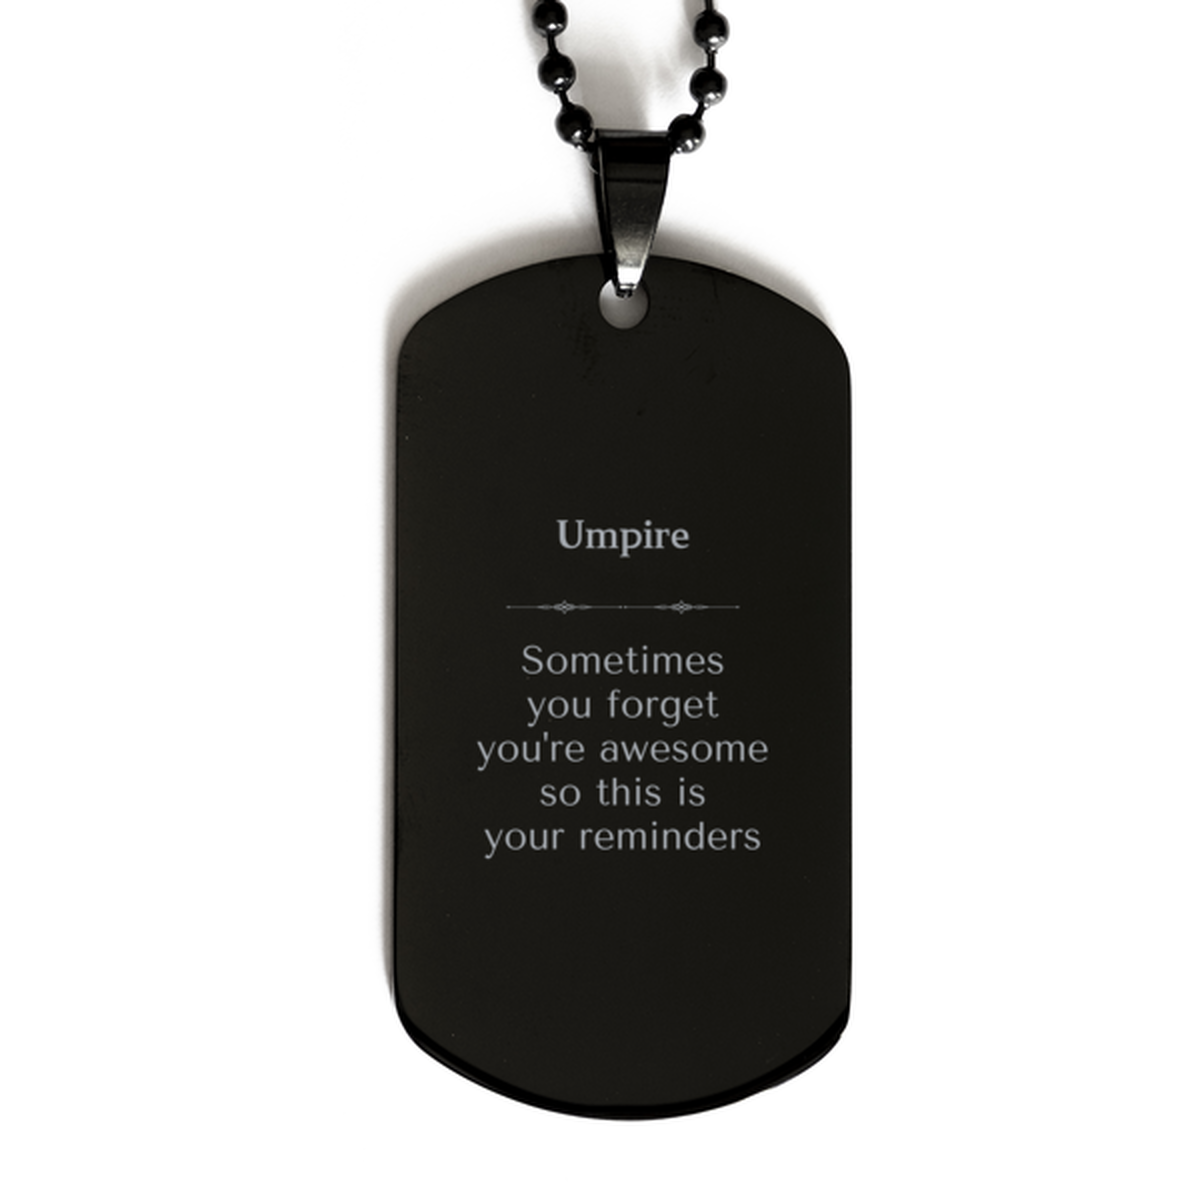 Sentimental Umpire Black Dog Tag, Umpire Sometimes you forget you're awesome so this is your reminders, Graduation Christmas Birthday Gifts for Umpire, Men, Women, Coworkers